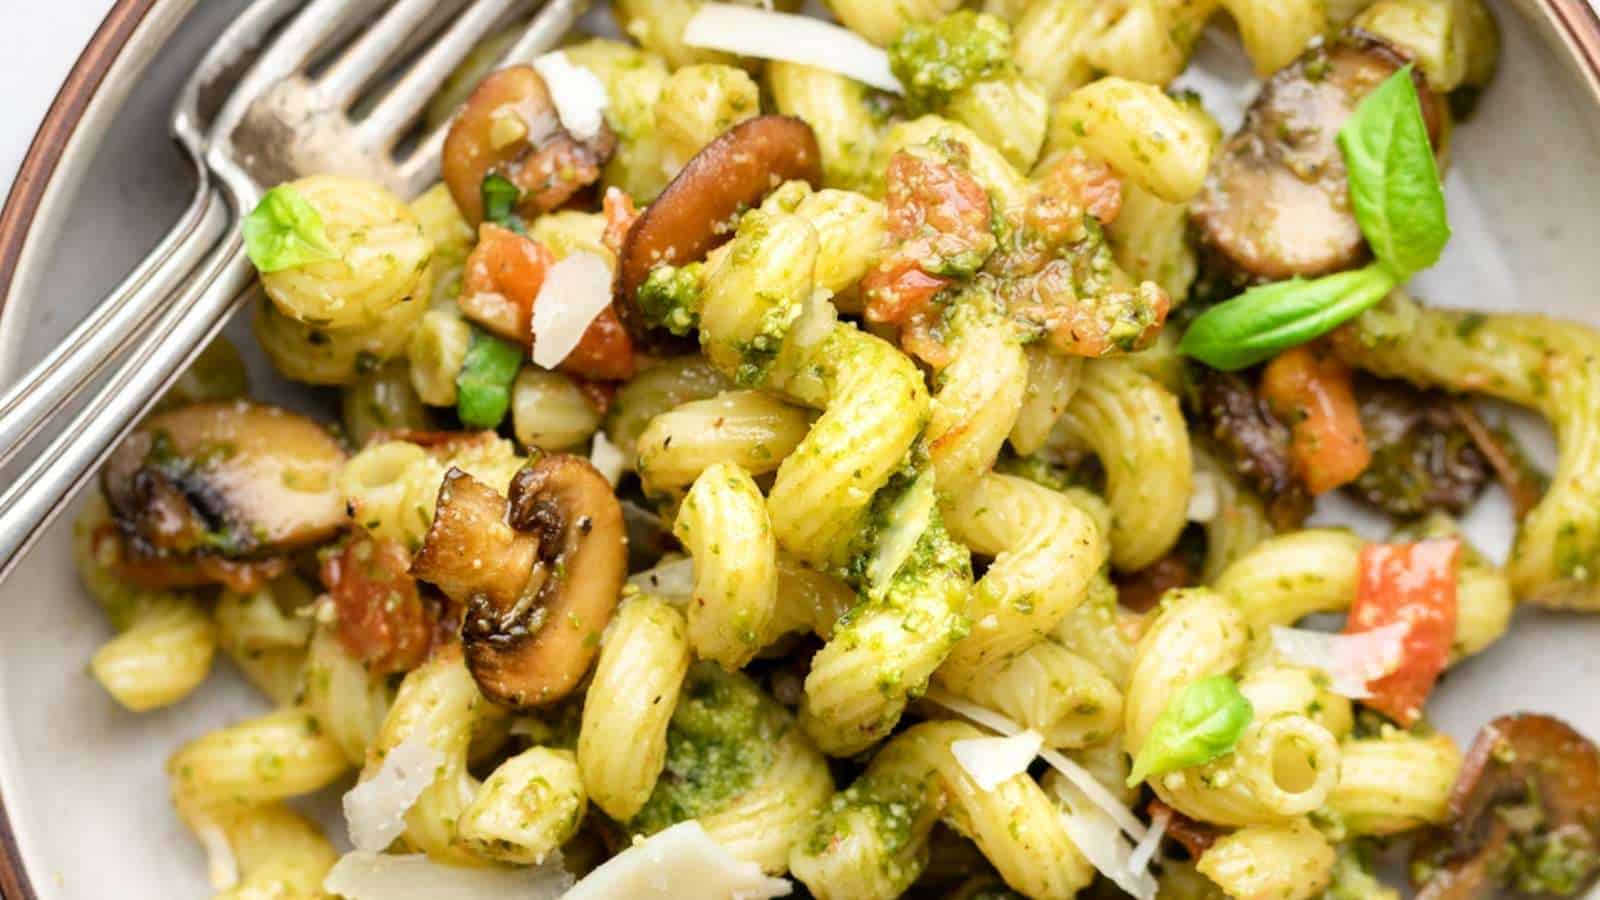 A bowl of pasta with mushrooms and pesto.